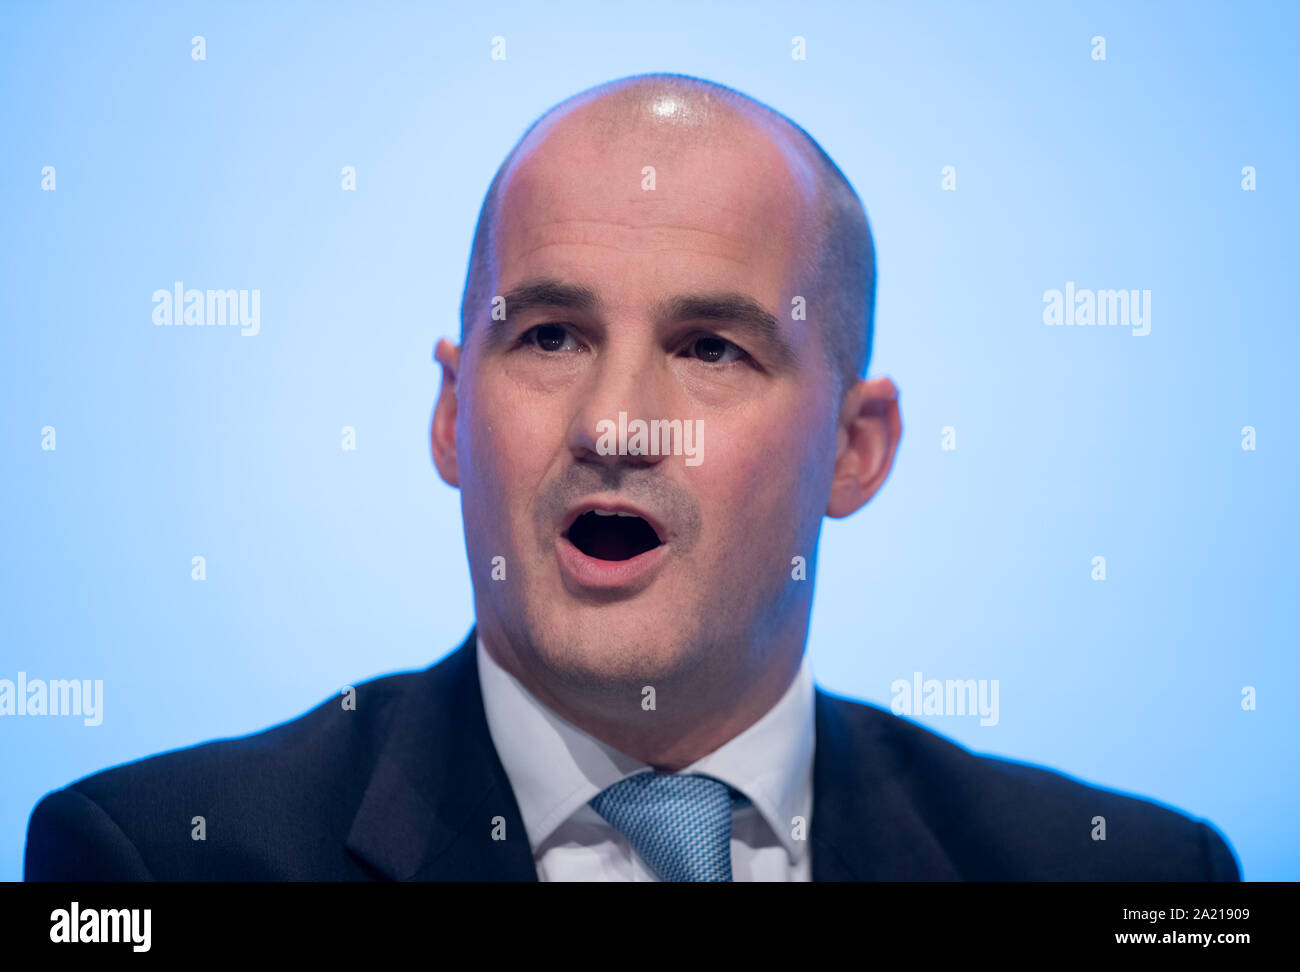 Manchester, UK. 30th Sep, 2019. Jake Berry, Minister of State (Minister for the Northern Powerhouse and Local Growth) and MP for Rossendale and Darwen speaks at day two of the Conservative Party Conference in Manchester. Credit: Russell Hart/Alamy Live News Stock Photo